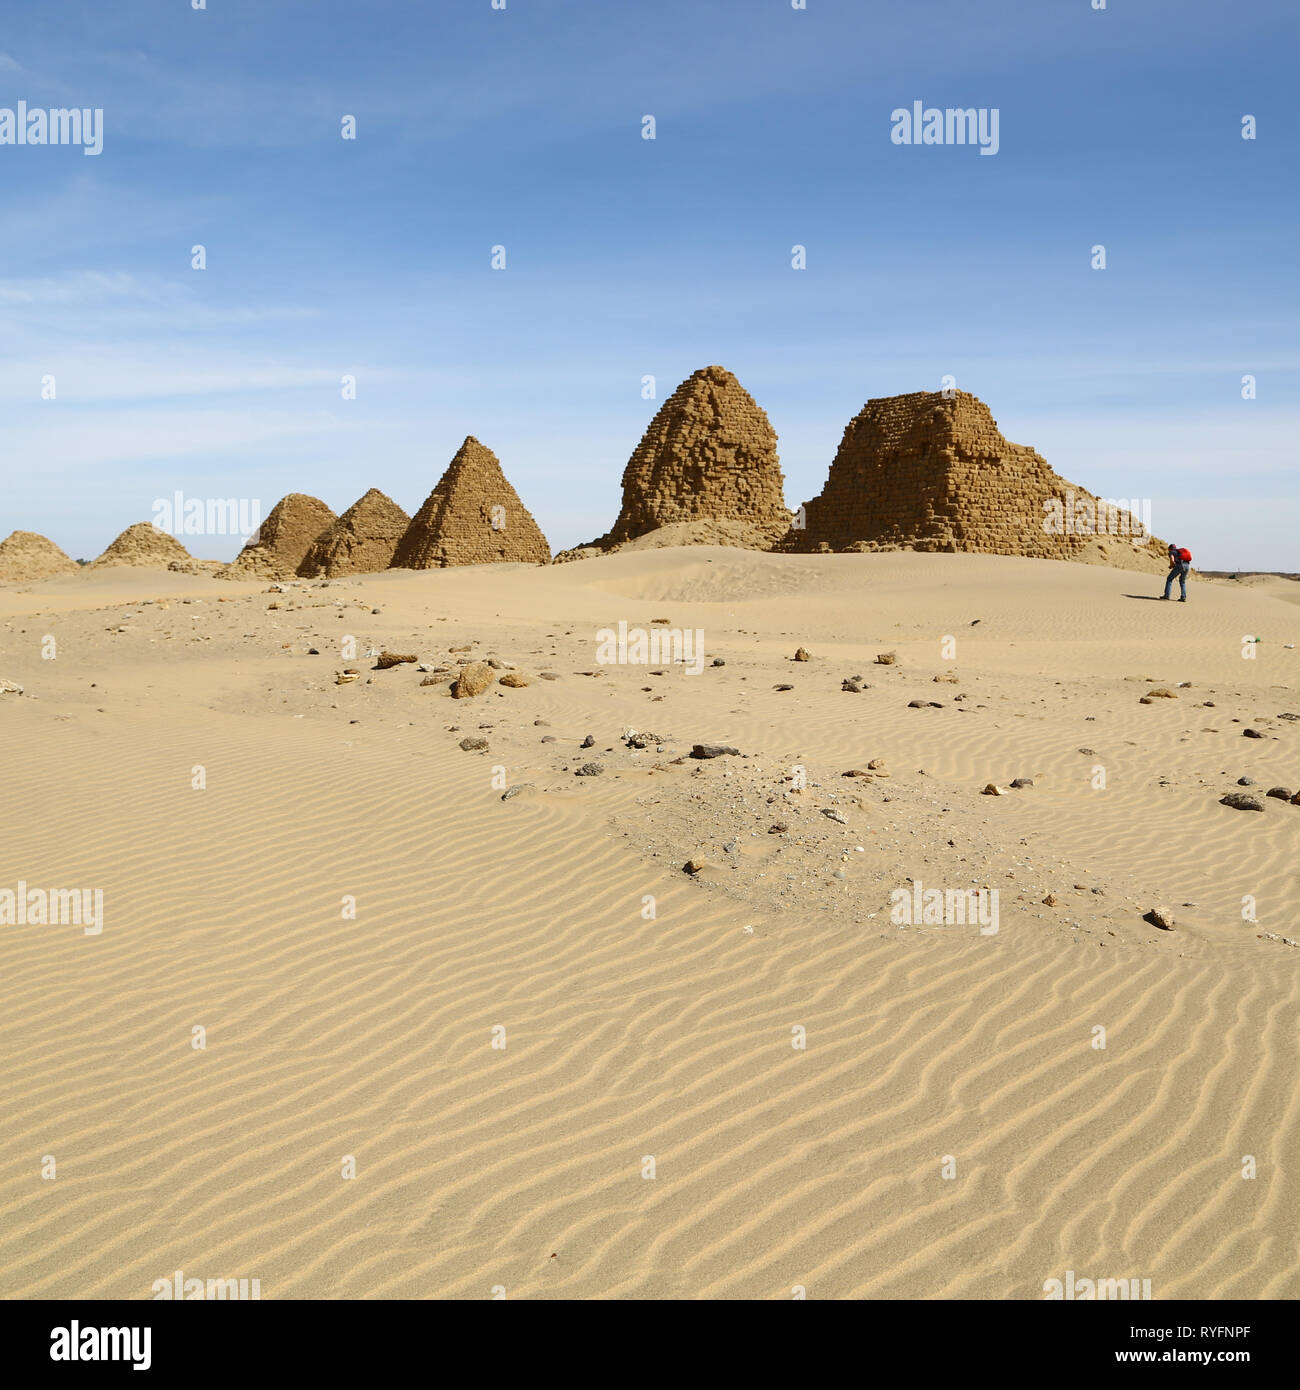 in africa sudan napata karima the antique pyramids of the black pharaohs in the middle of the desert Stock Photo